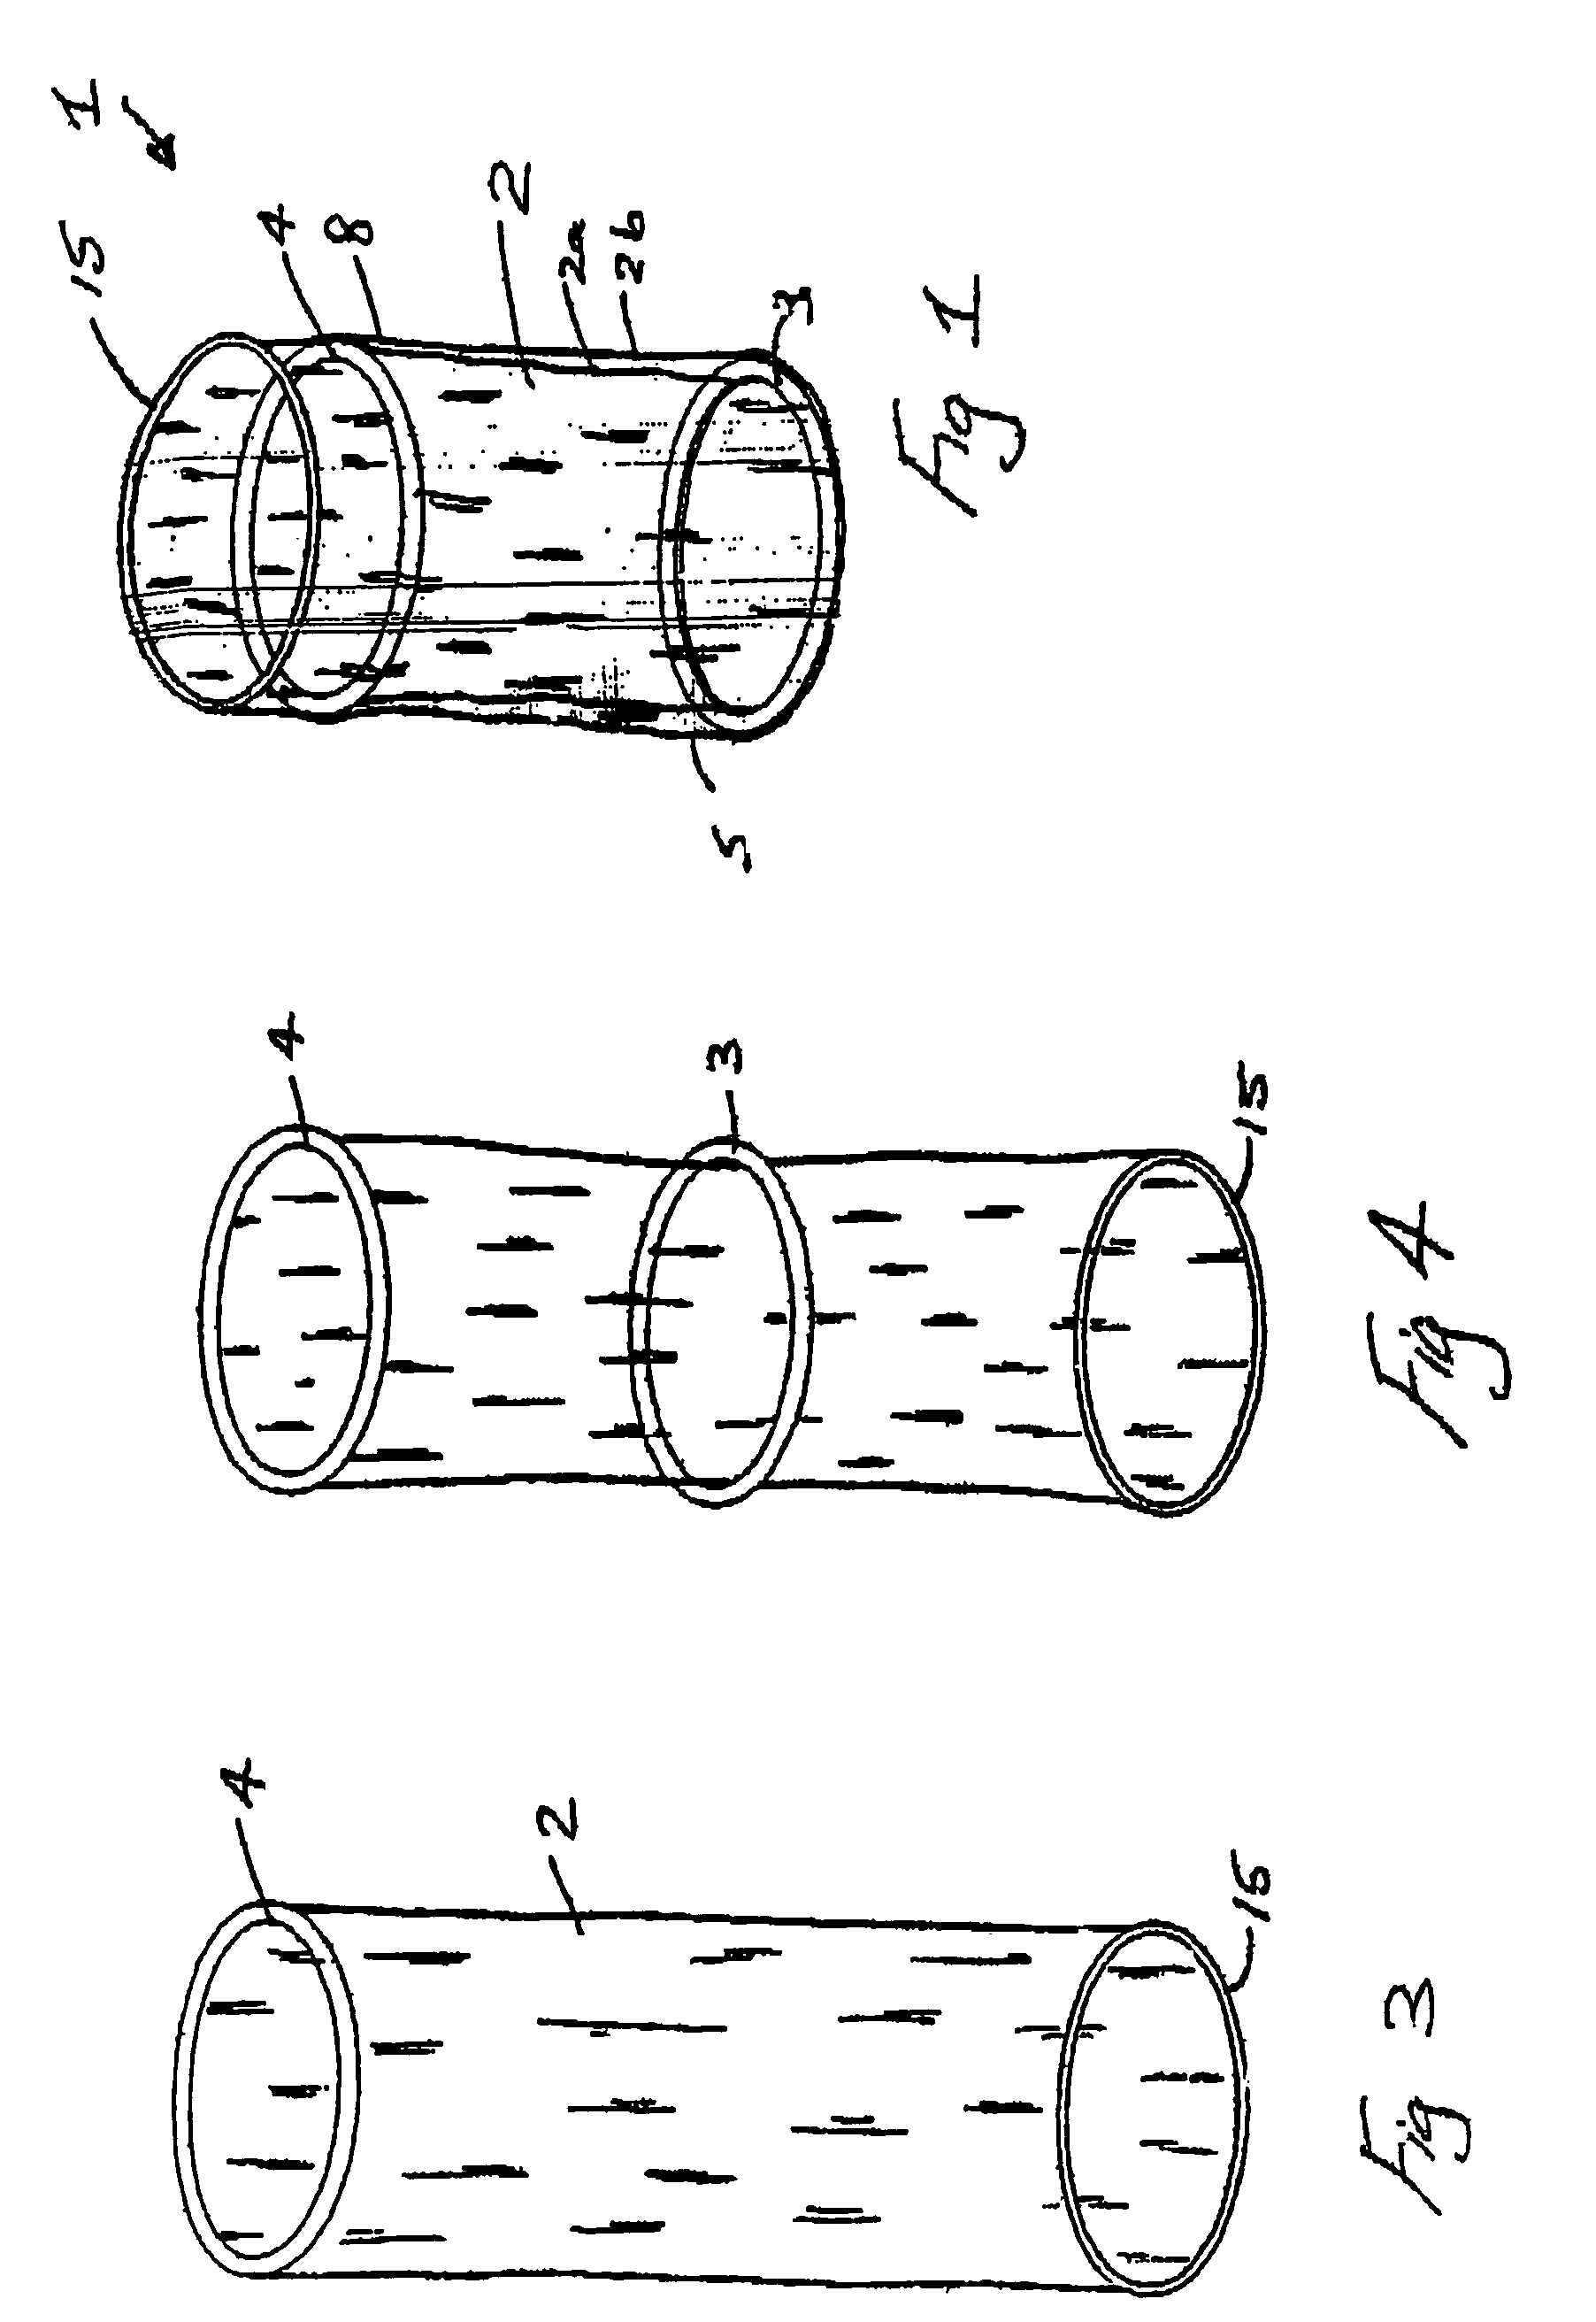 Wound retractor device